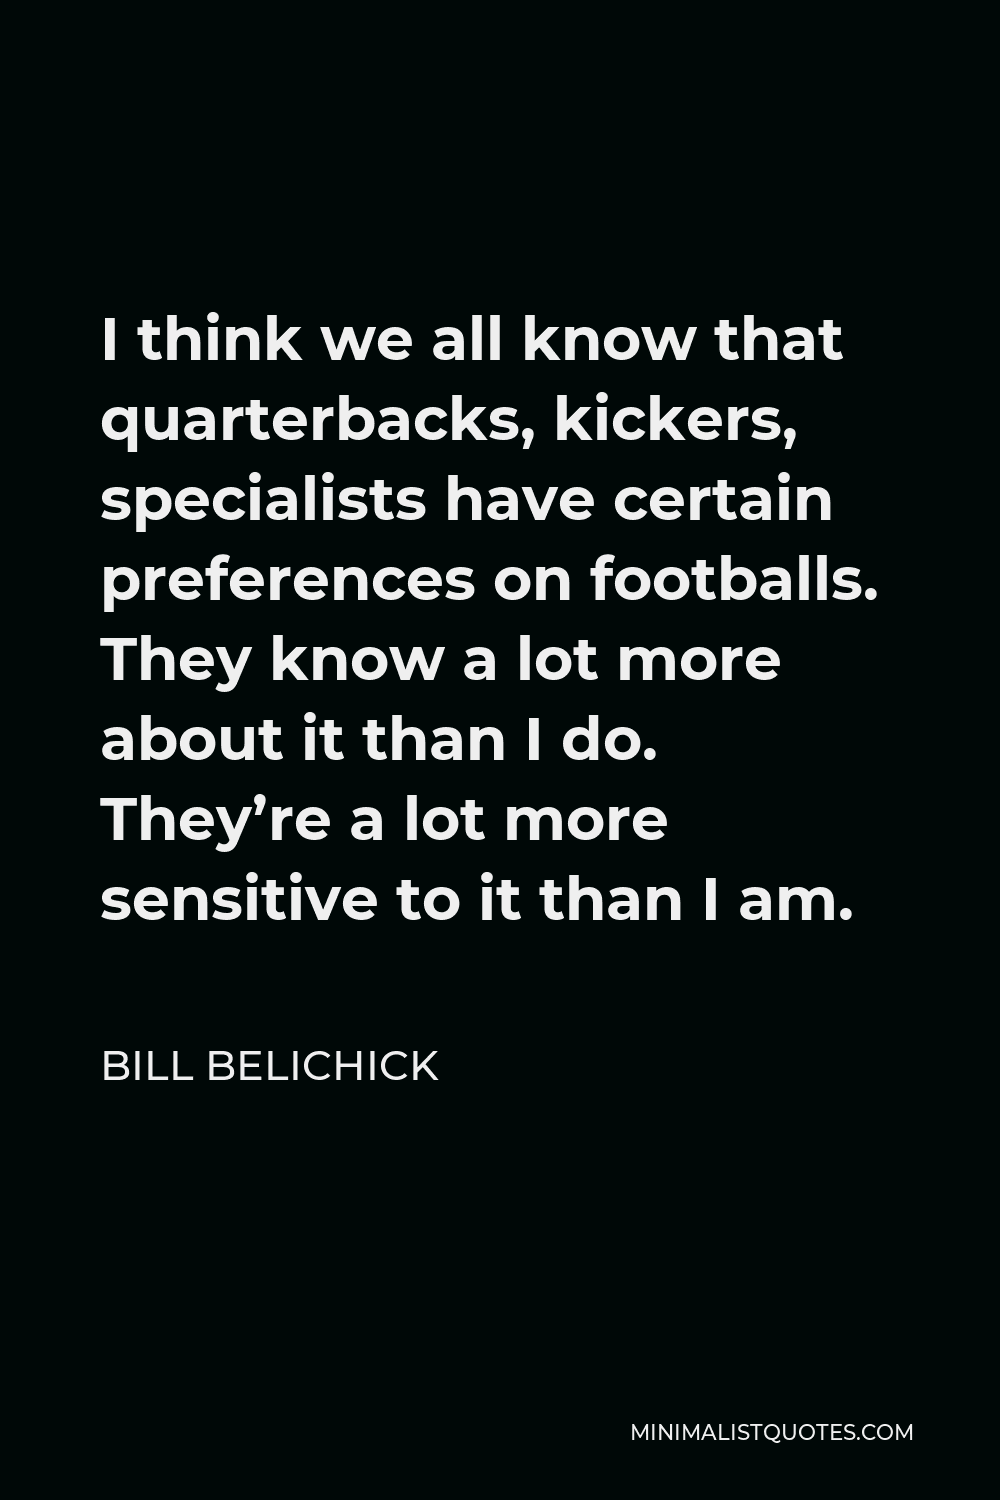 Bill Belichick Quote - I think we all know that quarterbacks, kickers, specialists have certain preferences on footballs. They know a lot more about it than I do. They’re a lot more sensitive to it than I am.